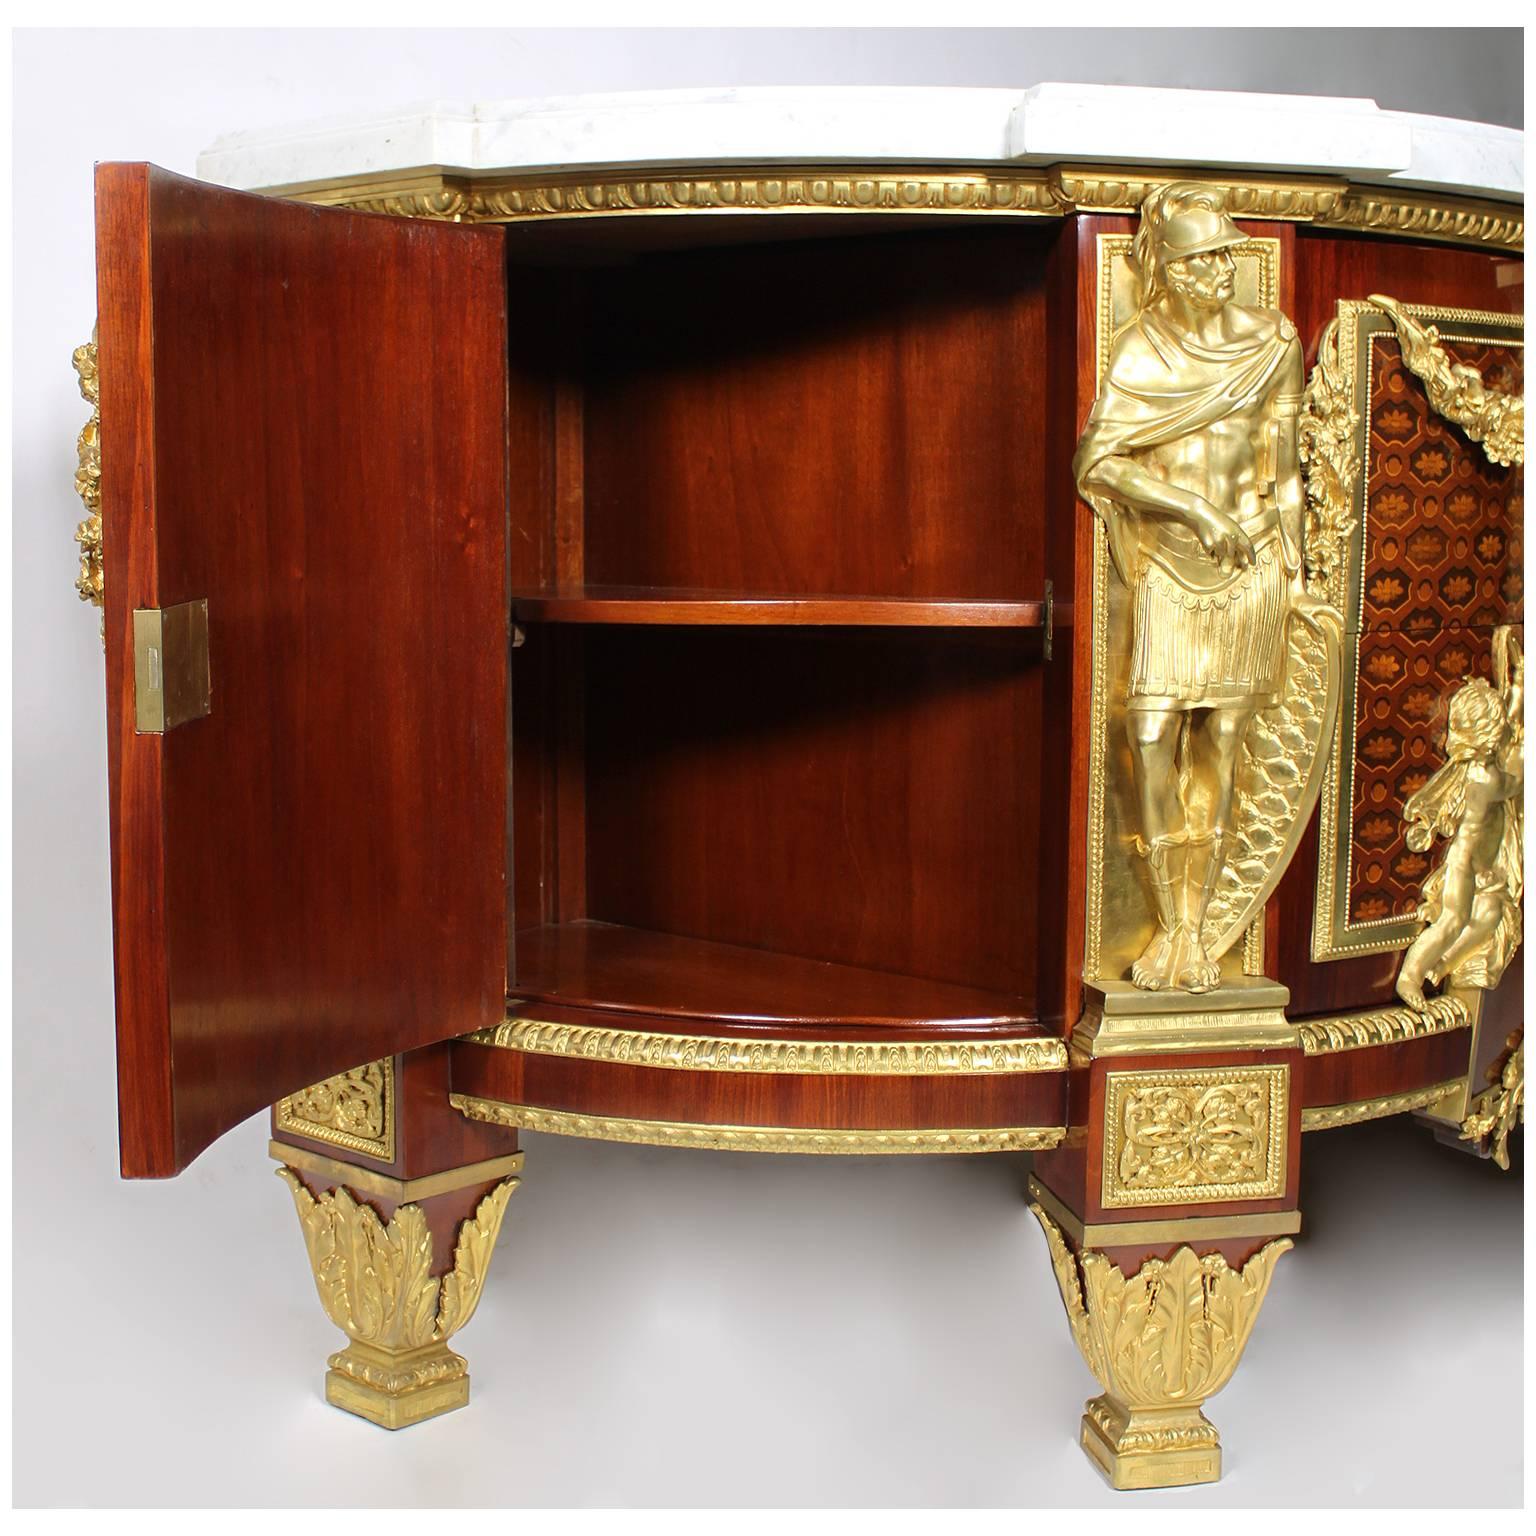 Fine French 19th Century Louis XVI Style Marquetry & Gilt-Bronze Mounted Commode For Sale 3